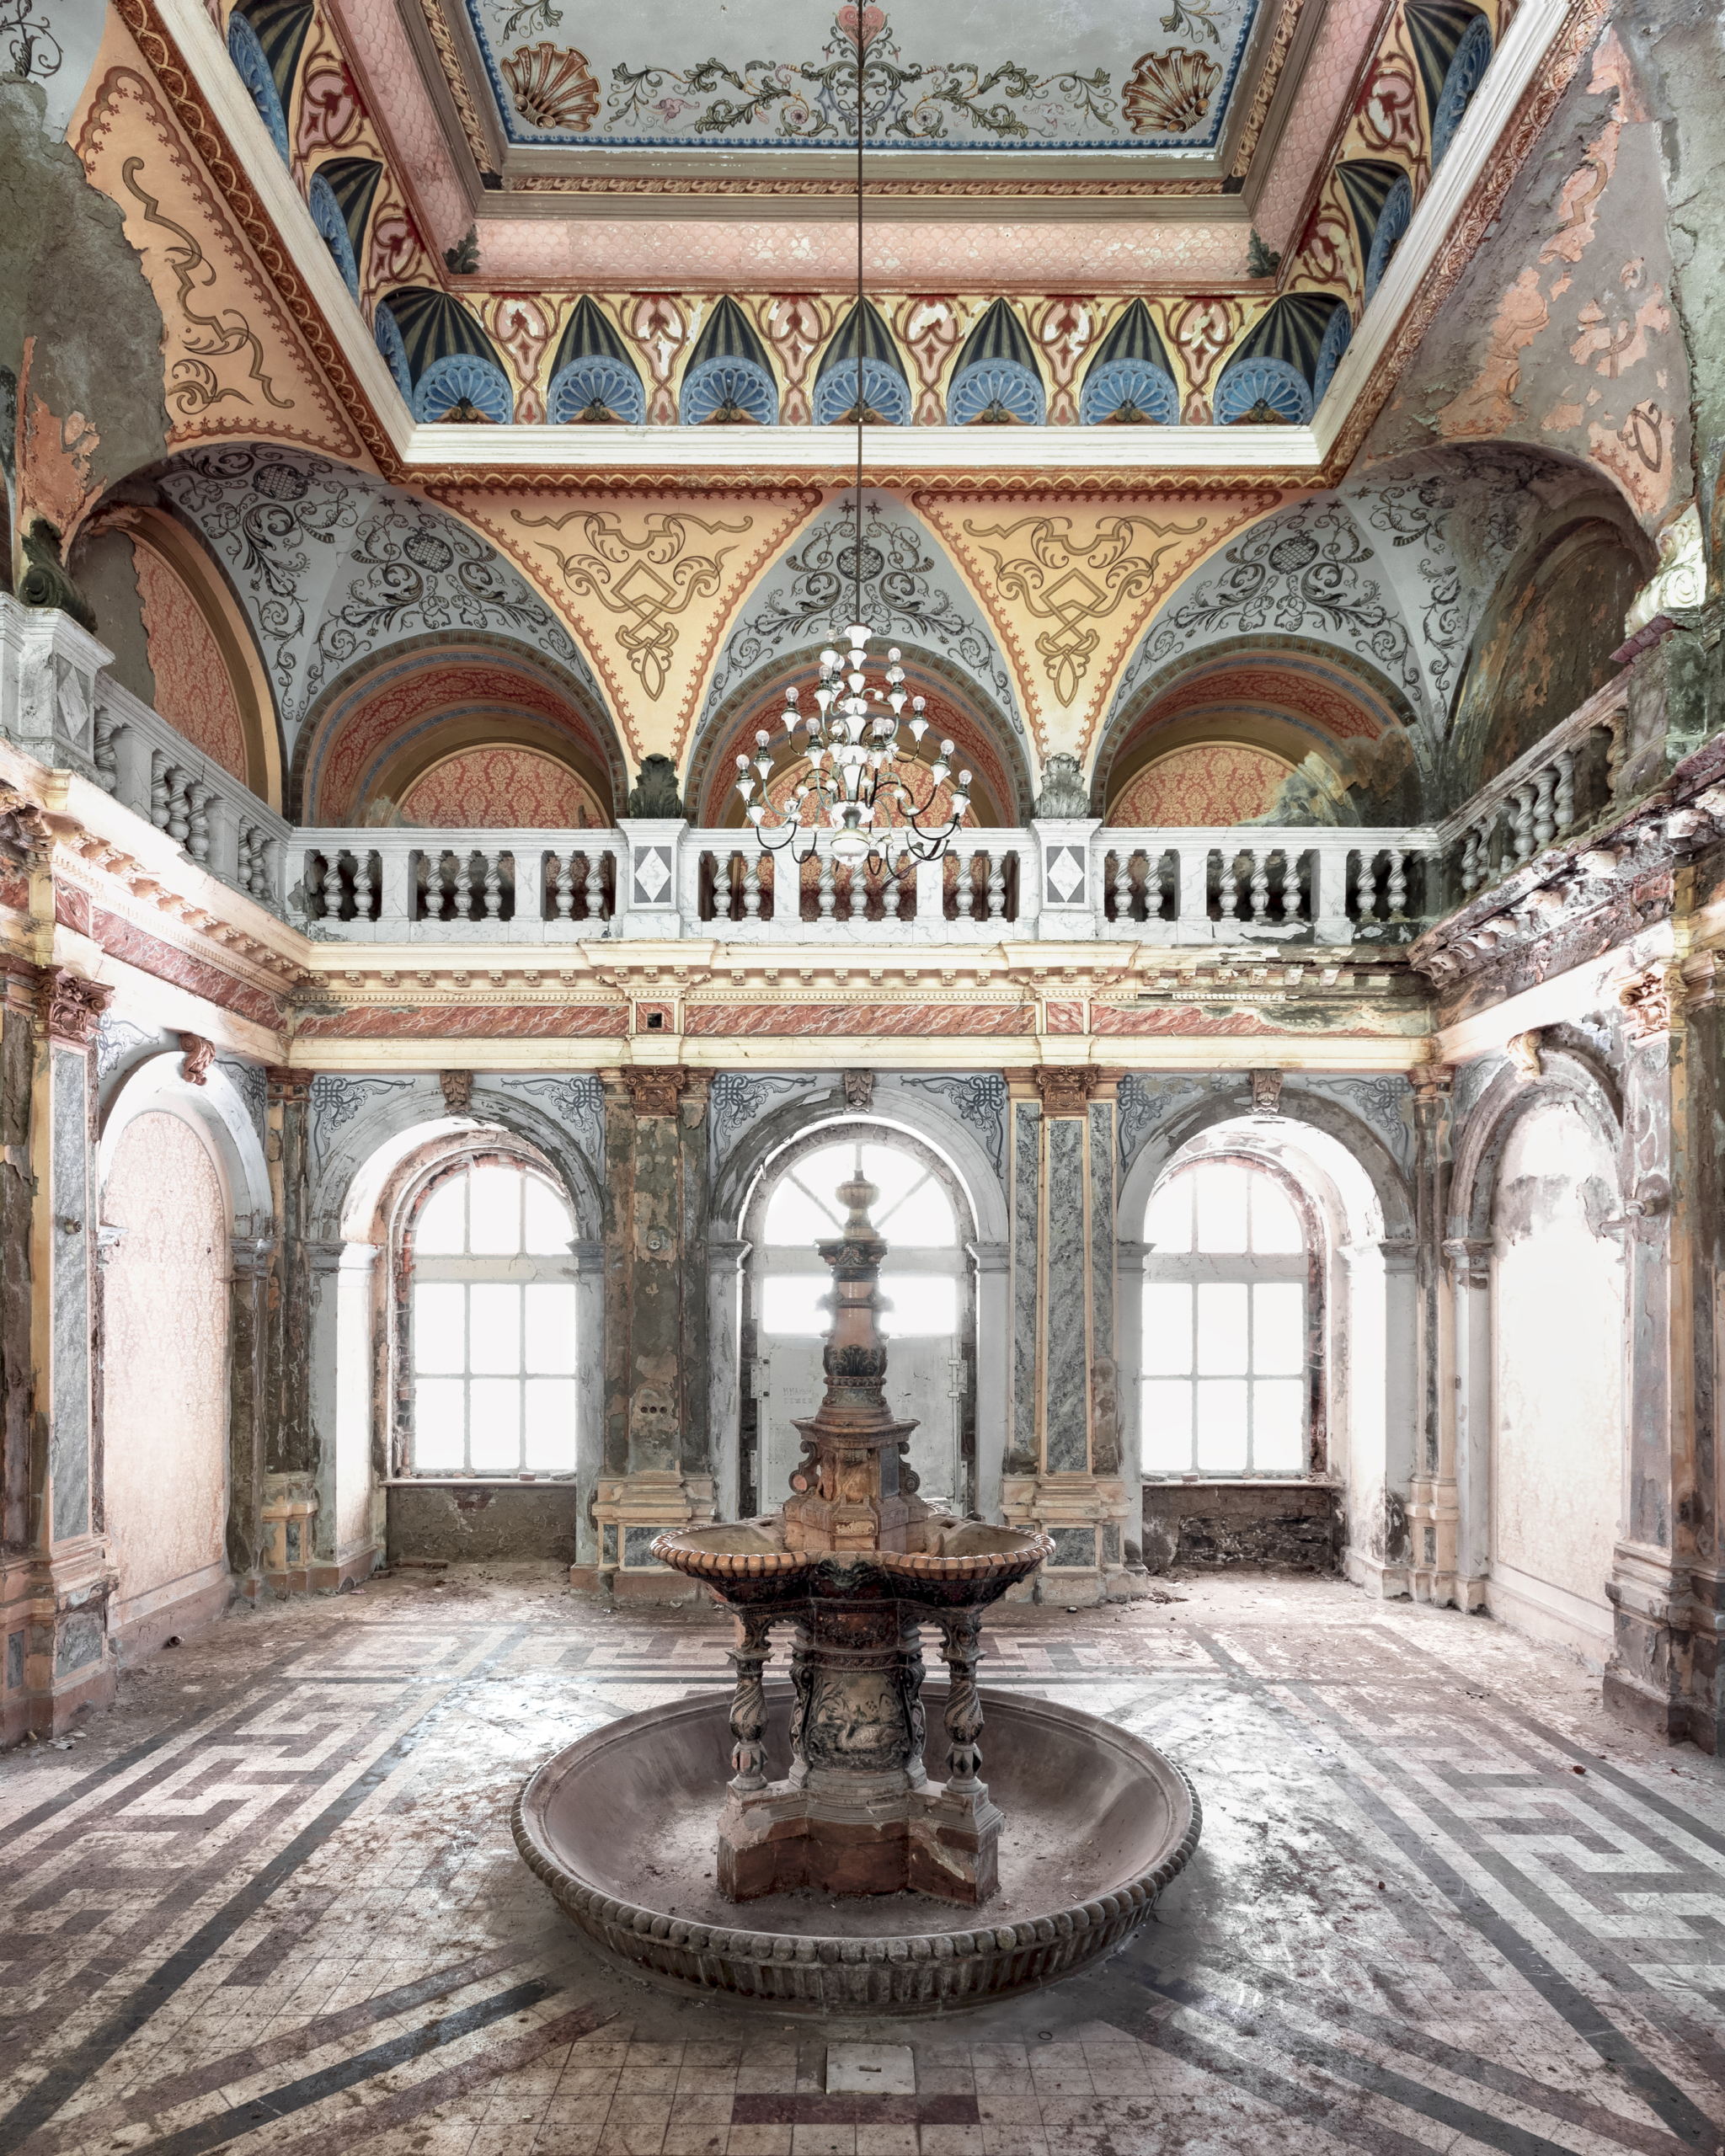 Abandoned thermal baths with grandiose architecture in Romania